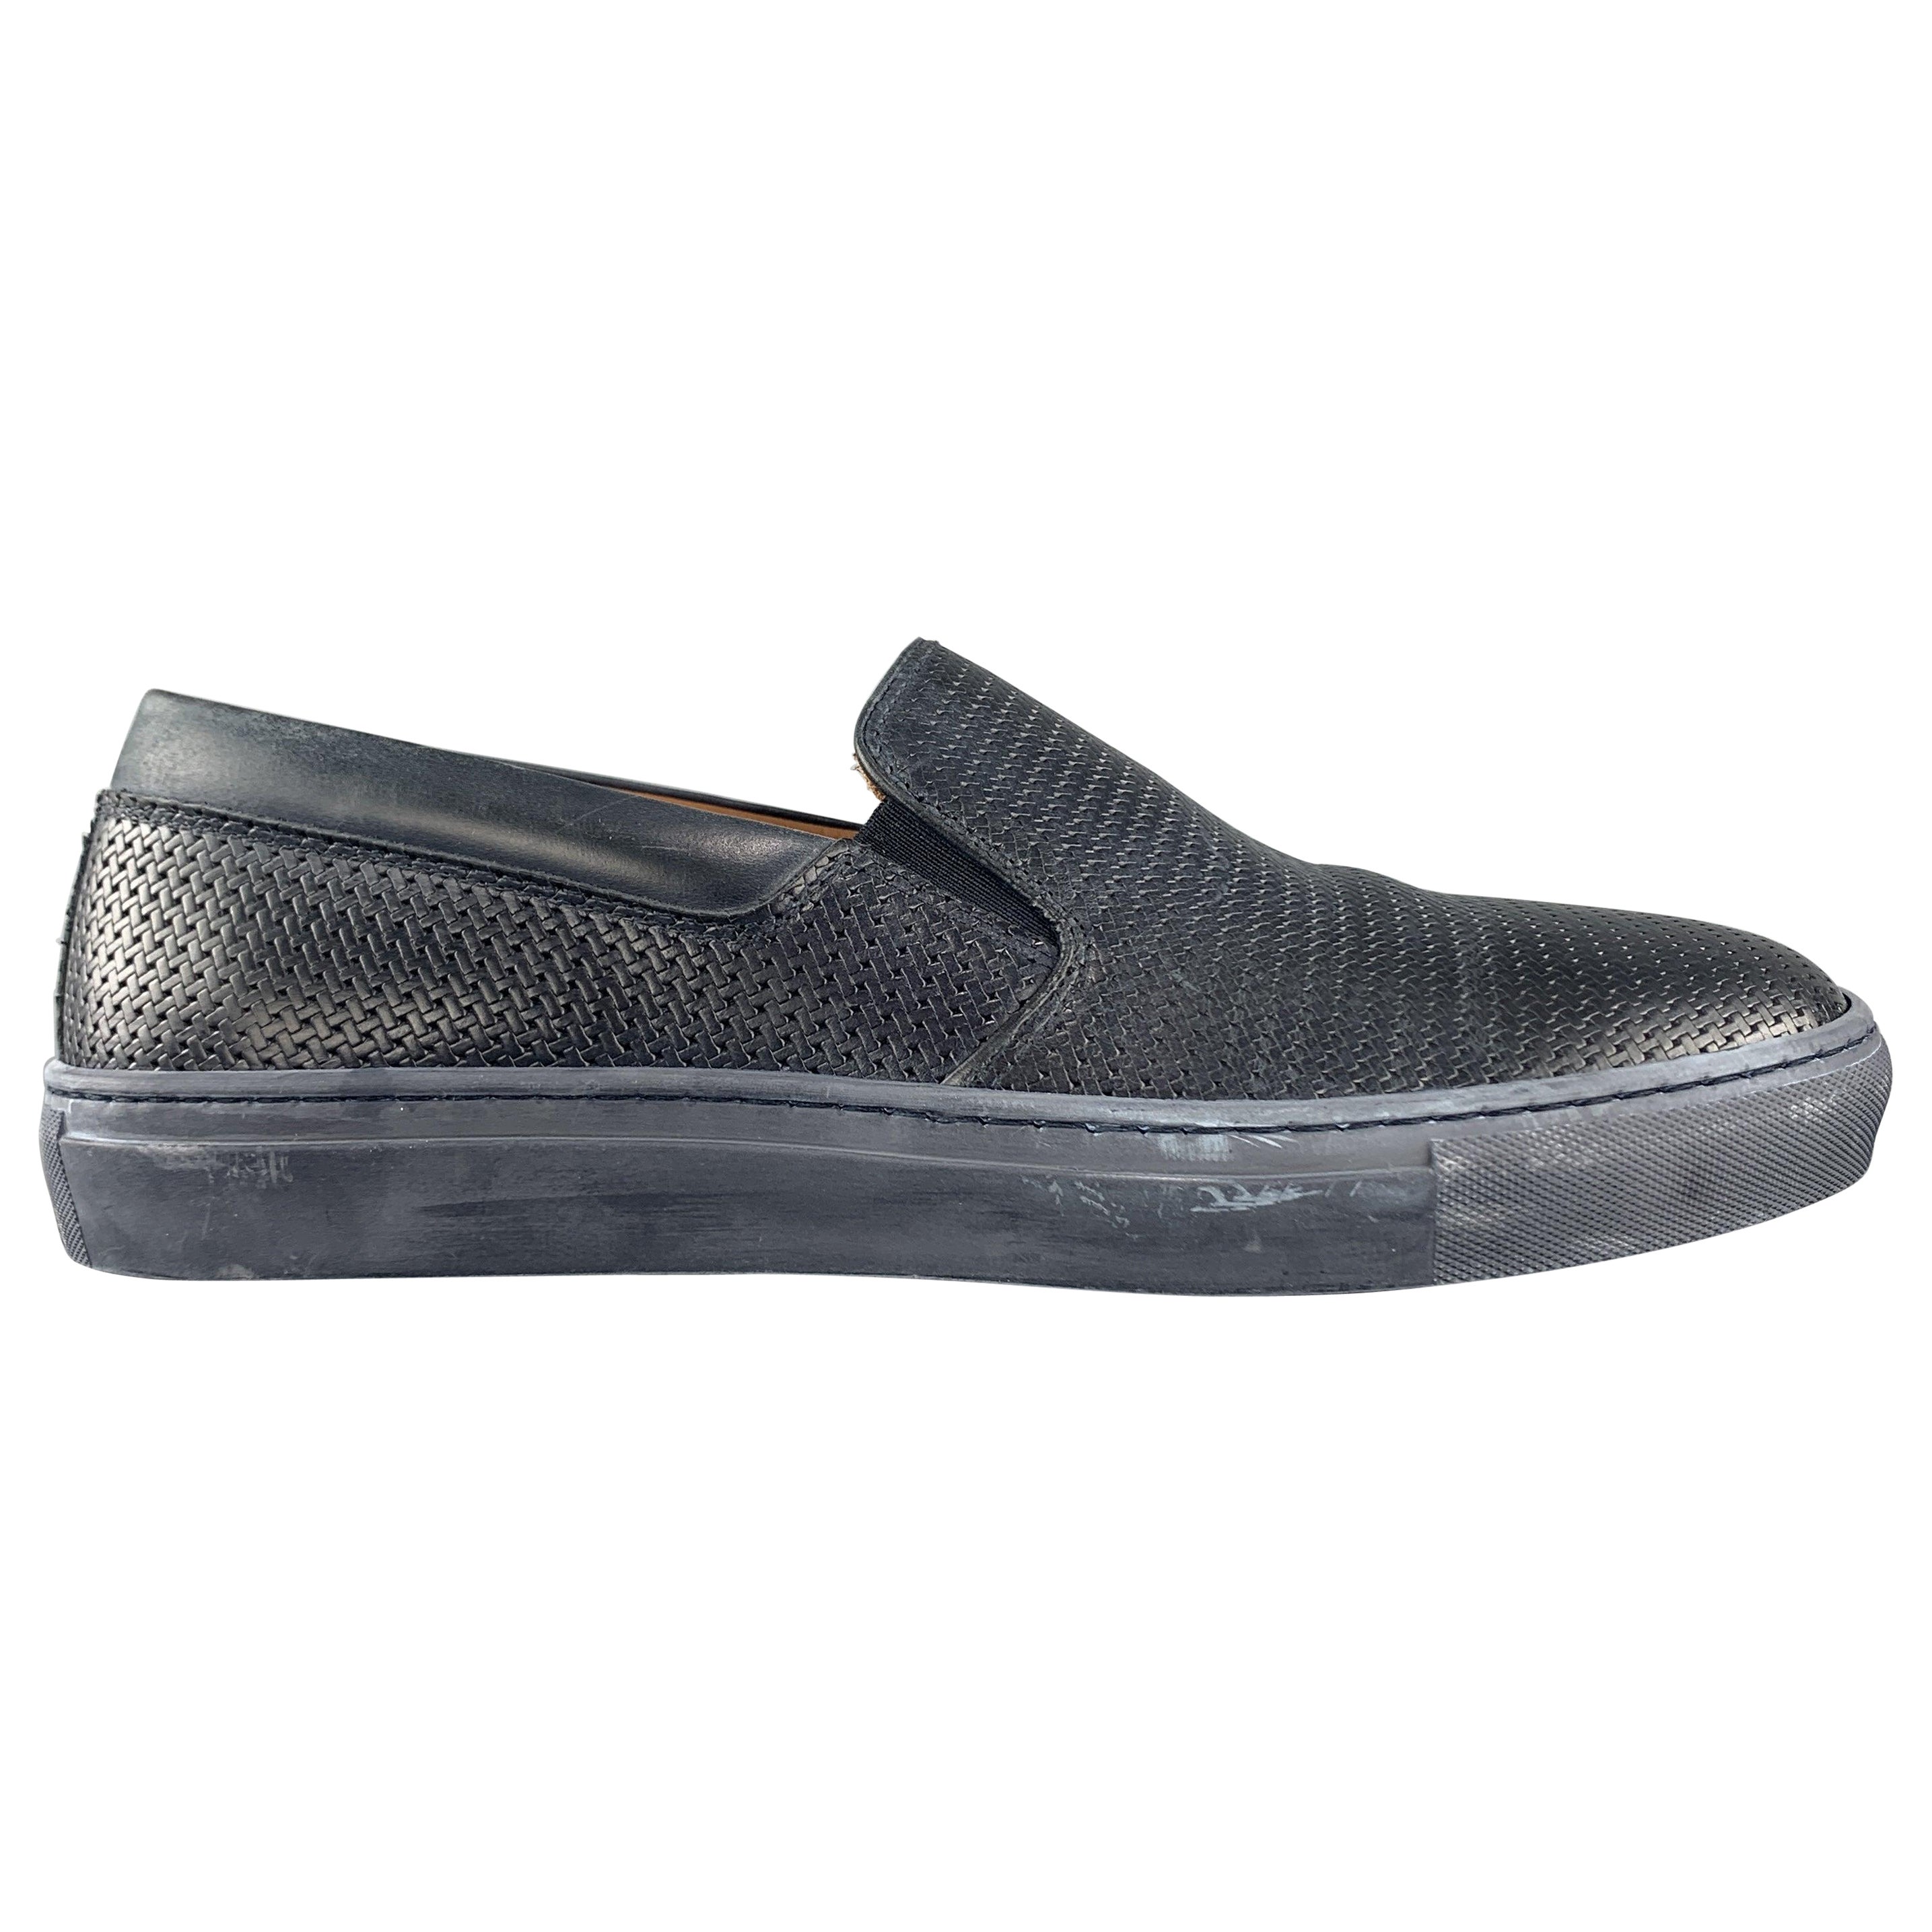 AQUATALIA Size 10 Navy Woven Leather Slip On Sneakers For Sale